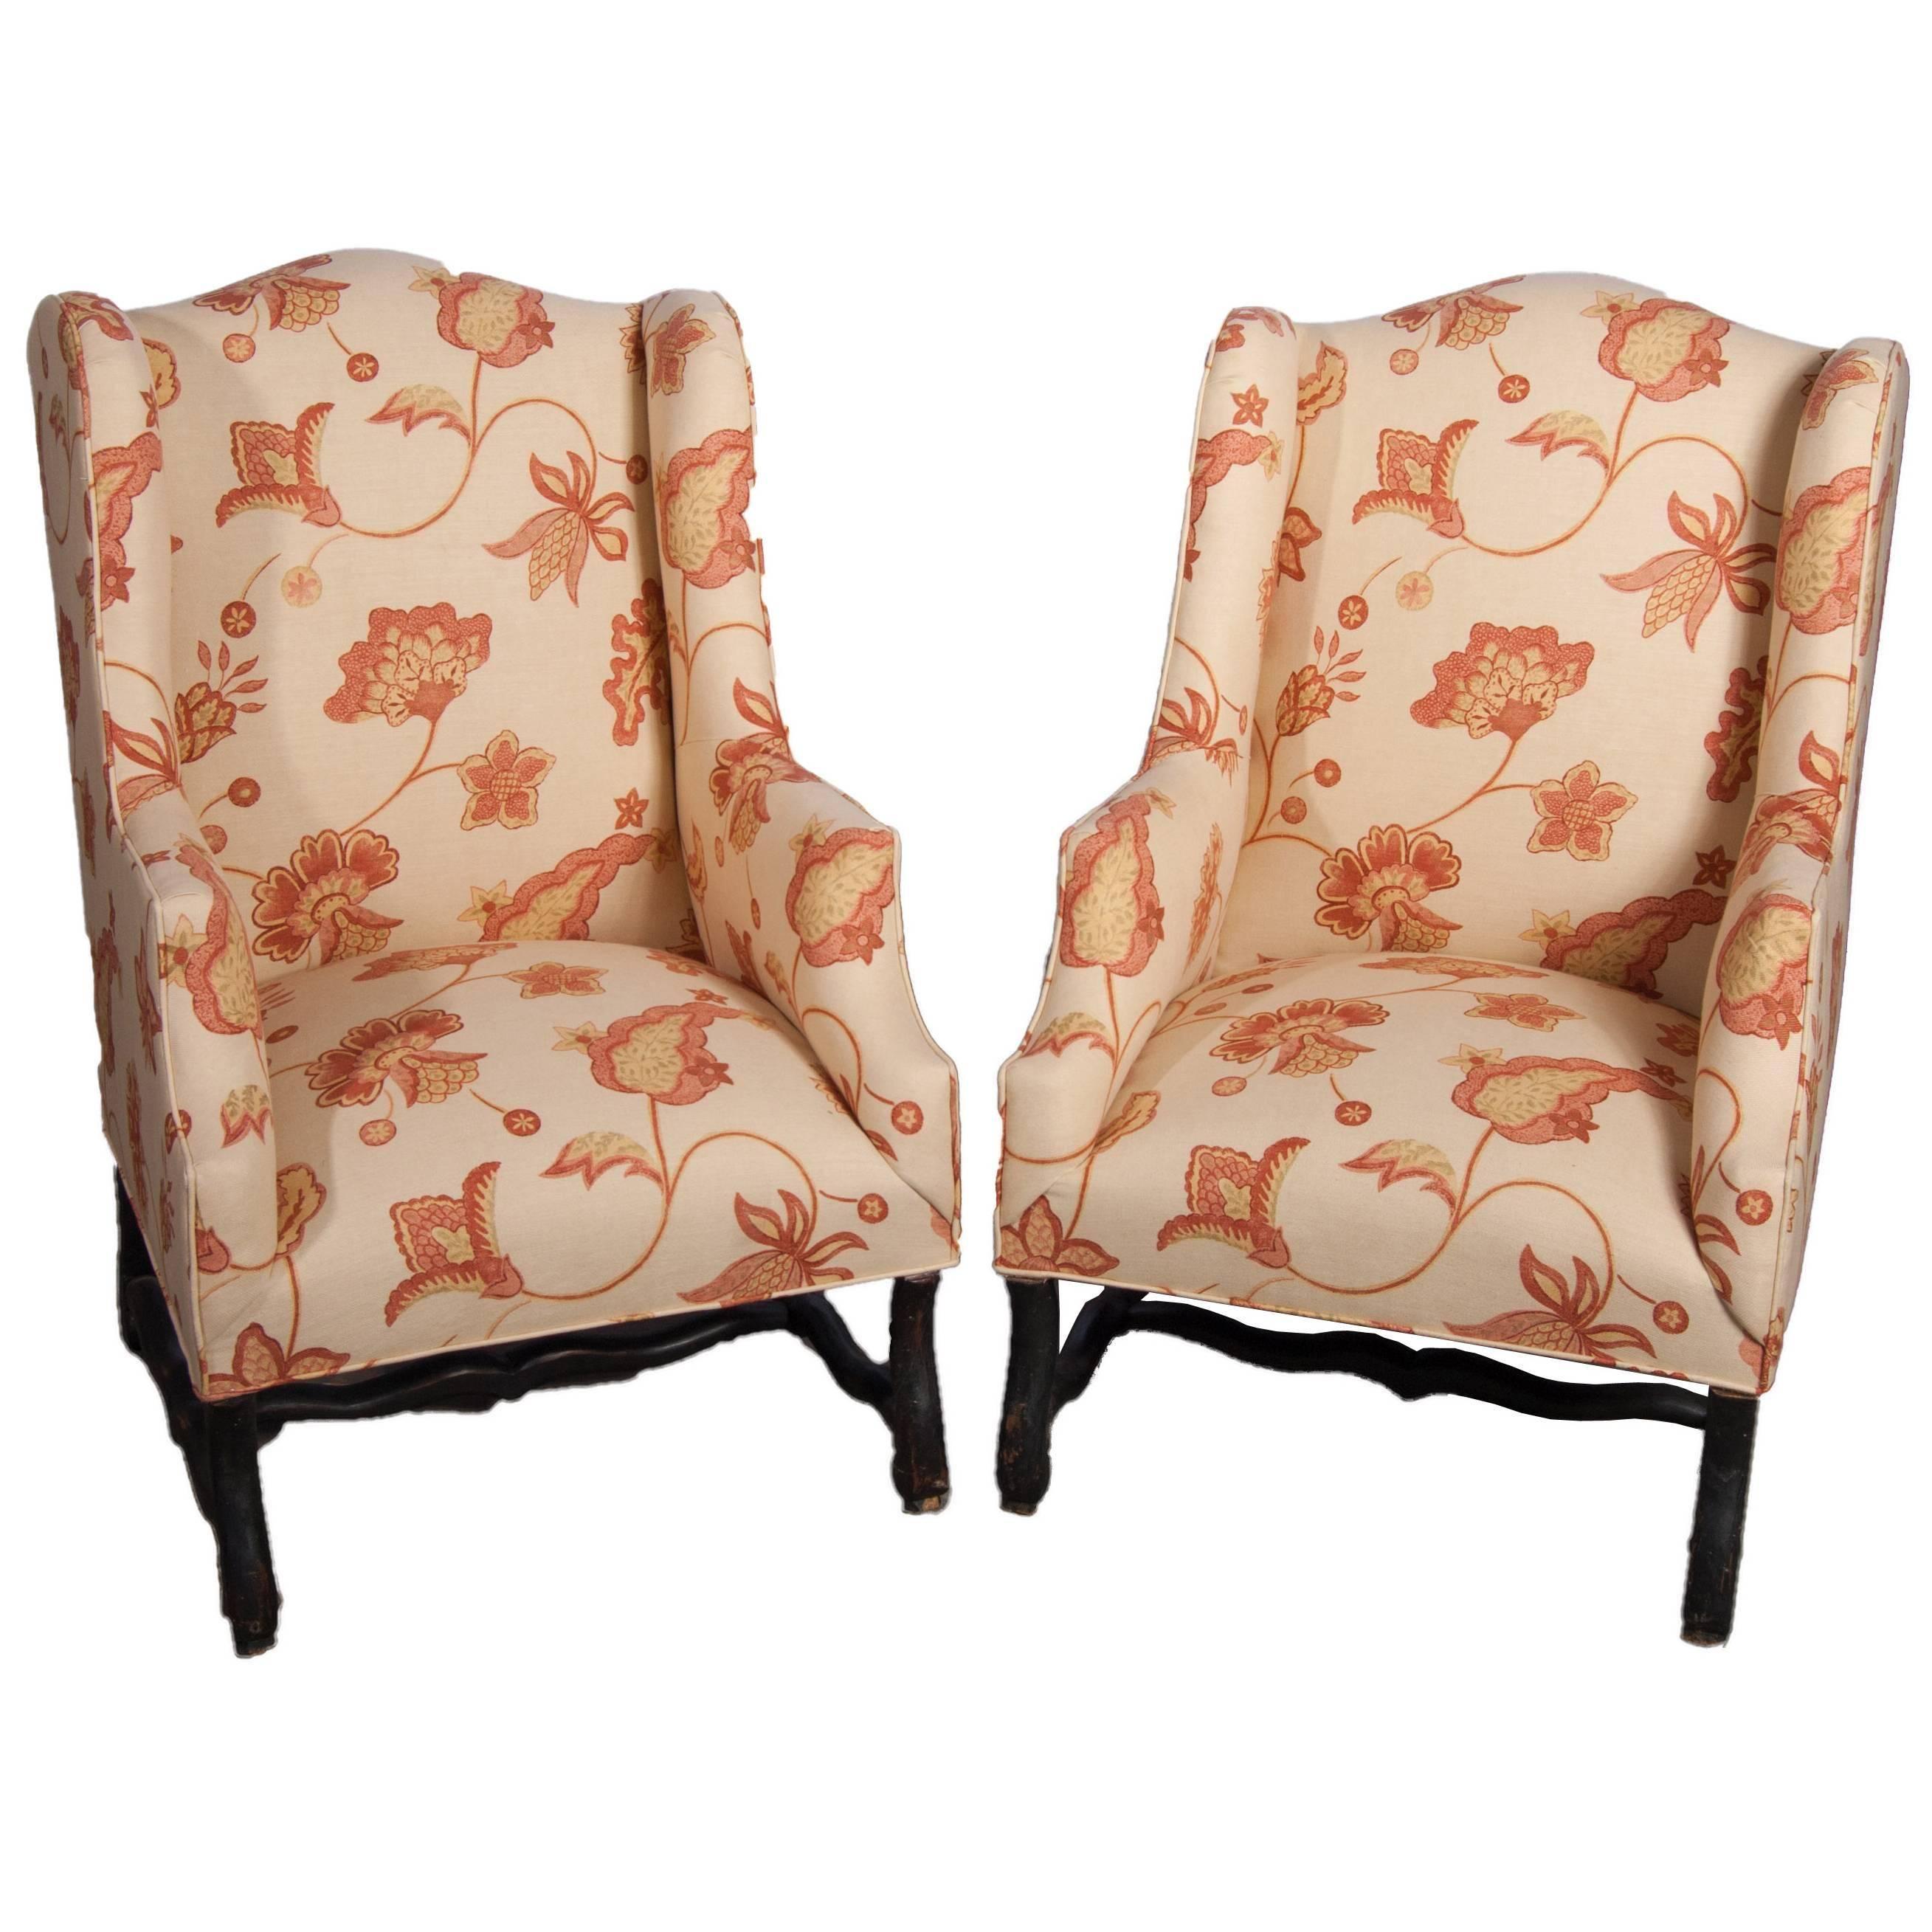 Pair of Louis XIII Style Wing Chairs with New Upholstery